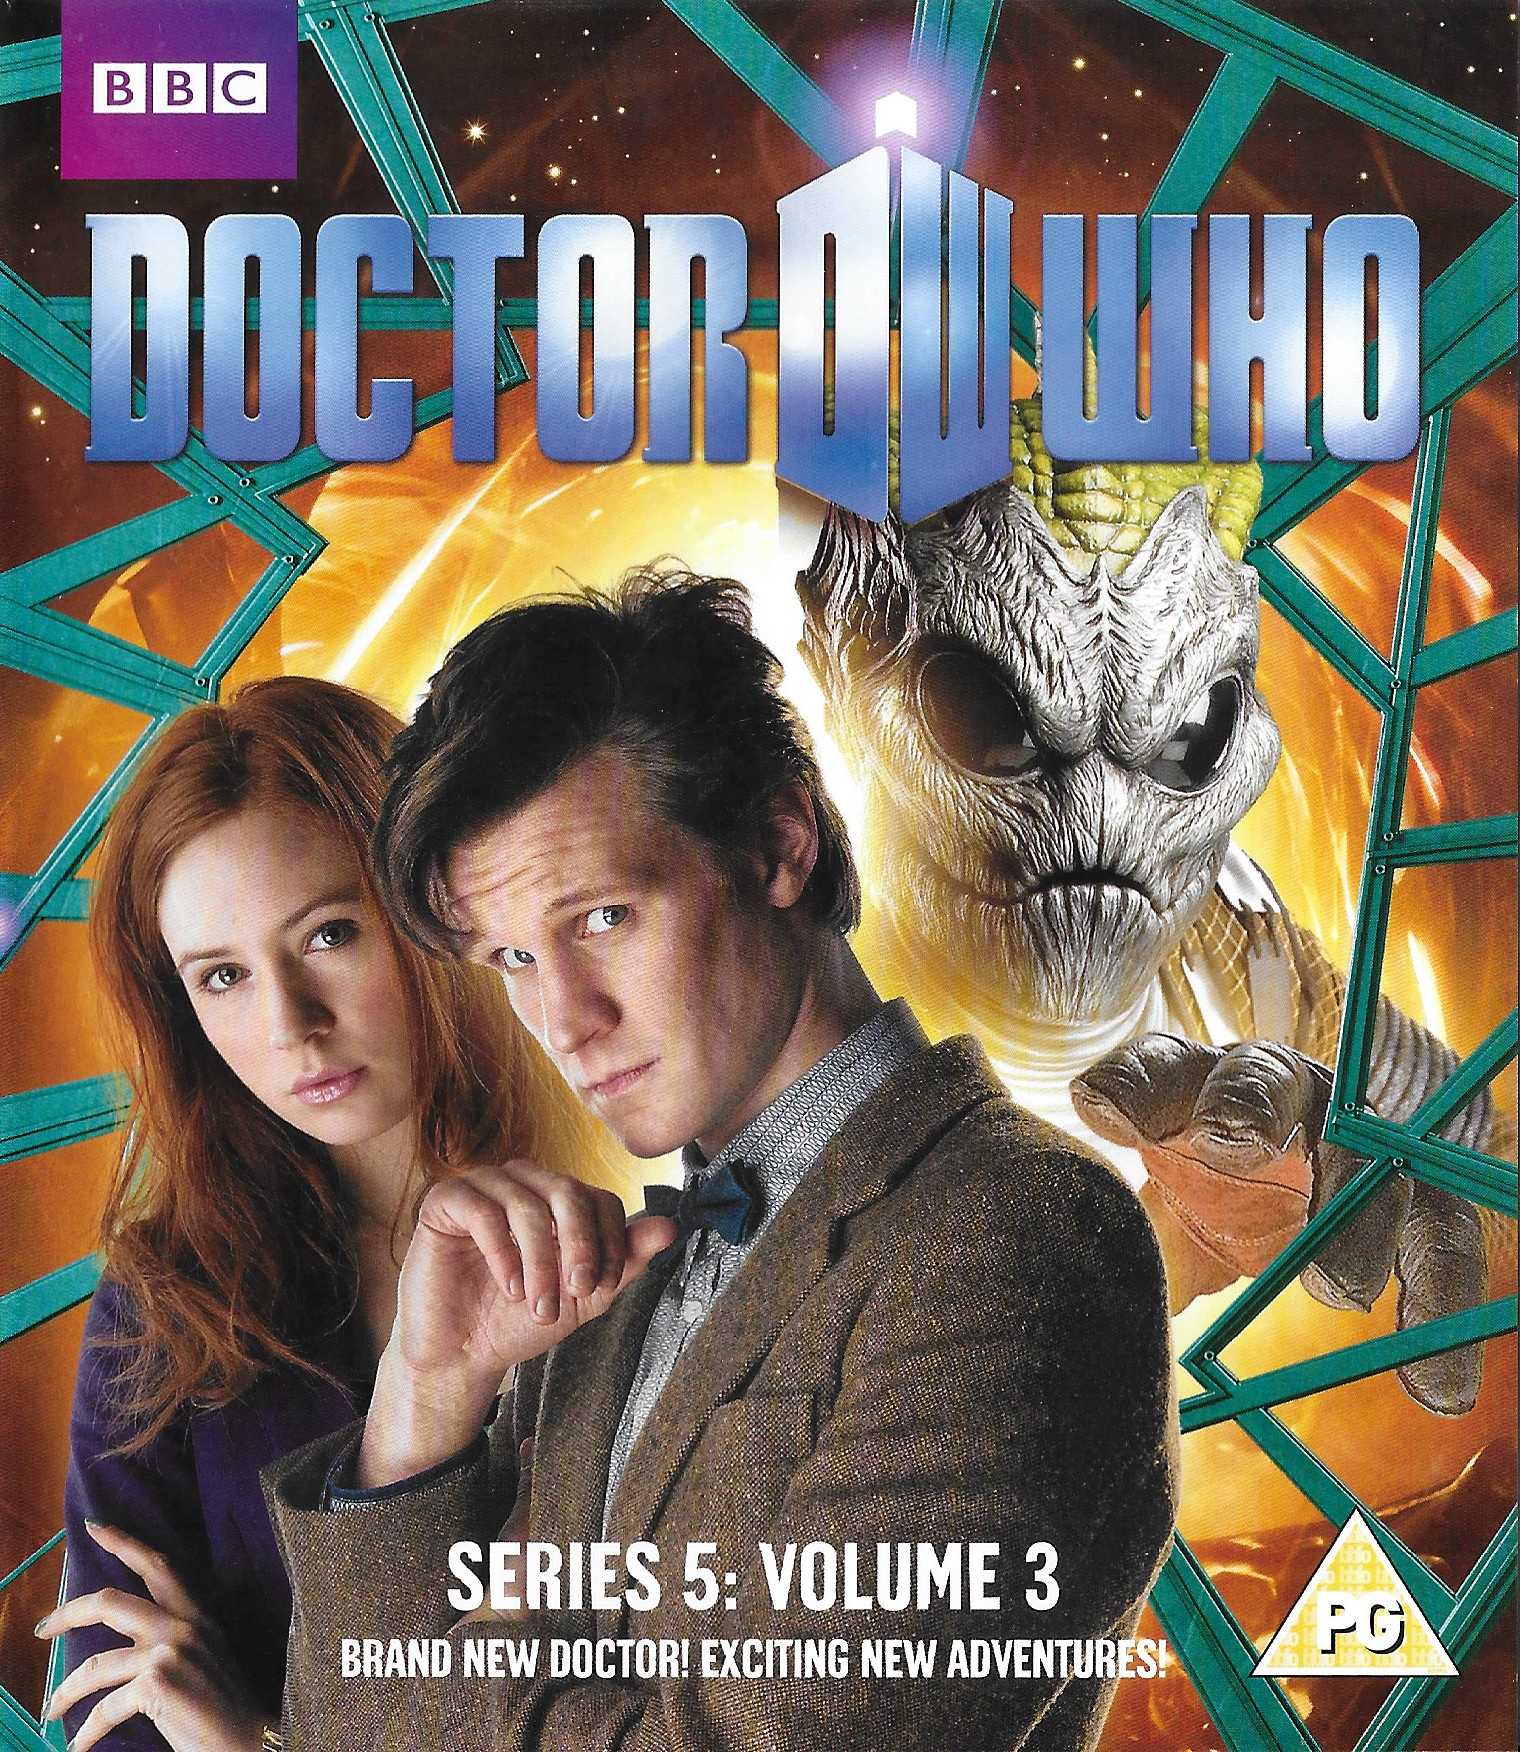 Picture of BBCBD 0084 Doctor Who - Series 5, volume 3 by artist Simon Nye / Chris Chibnall from the BBC records and Tapes library